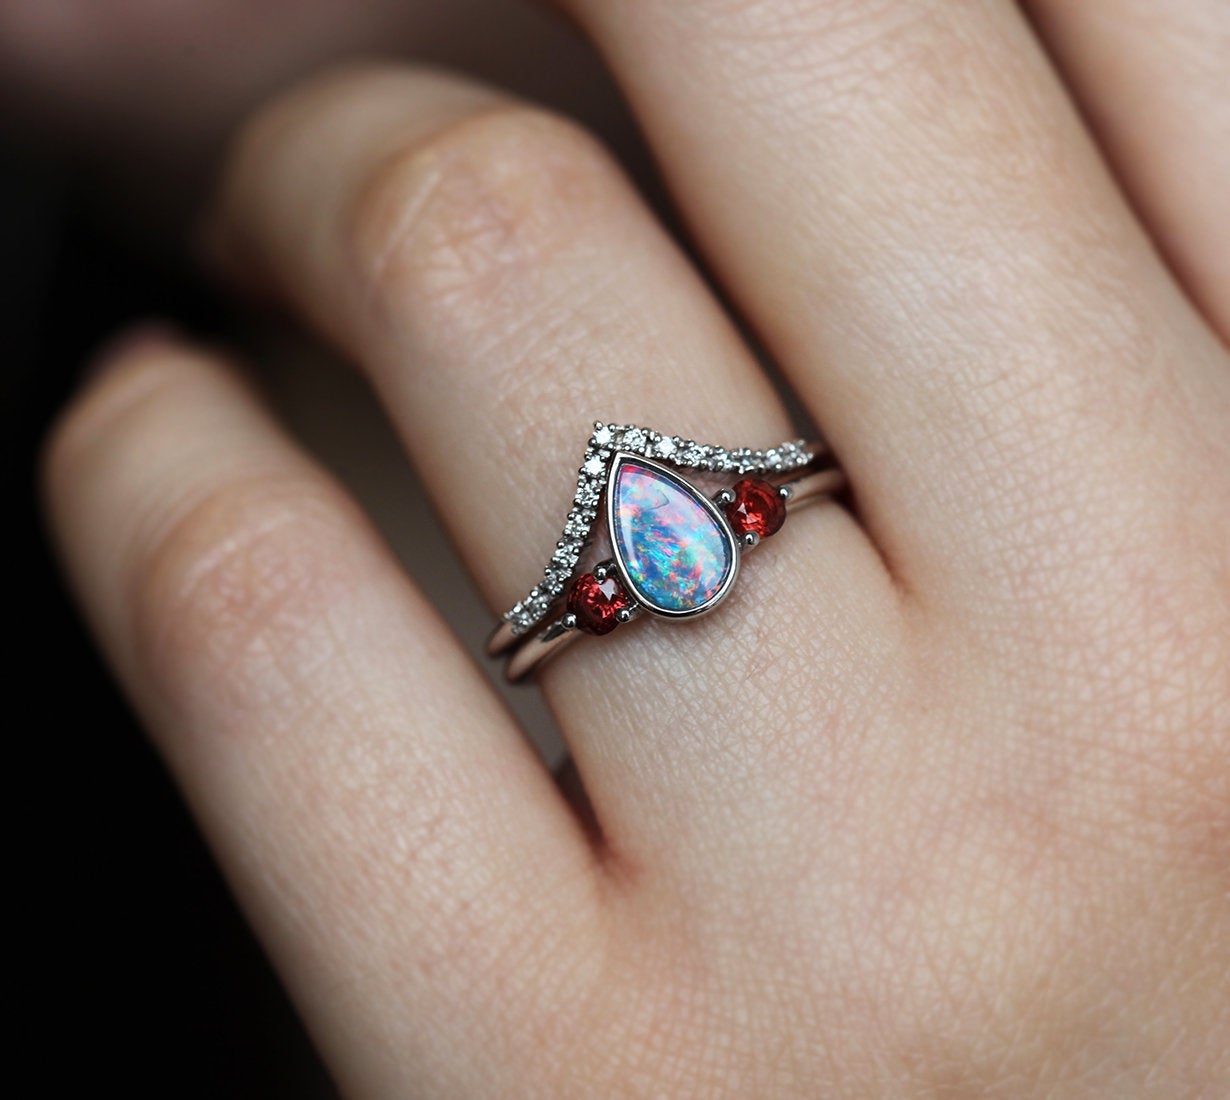 Three-Stone Black Pear Australian Opal Ring with Accent Red Round Garnet Gemstones with Diamond Crown Band